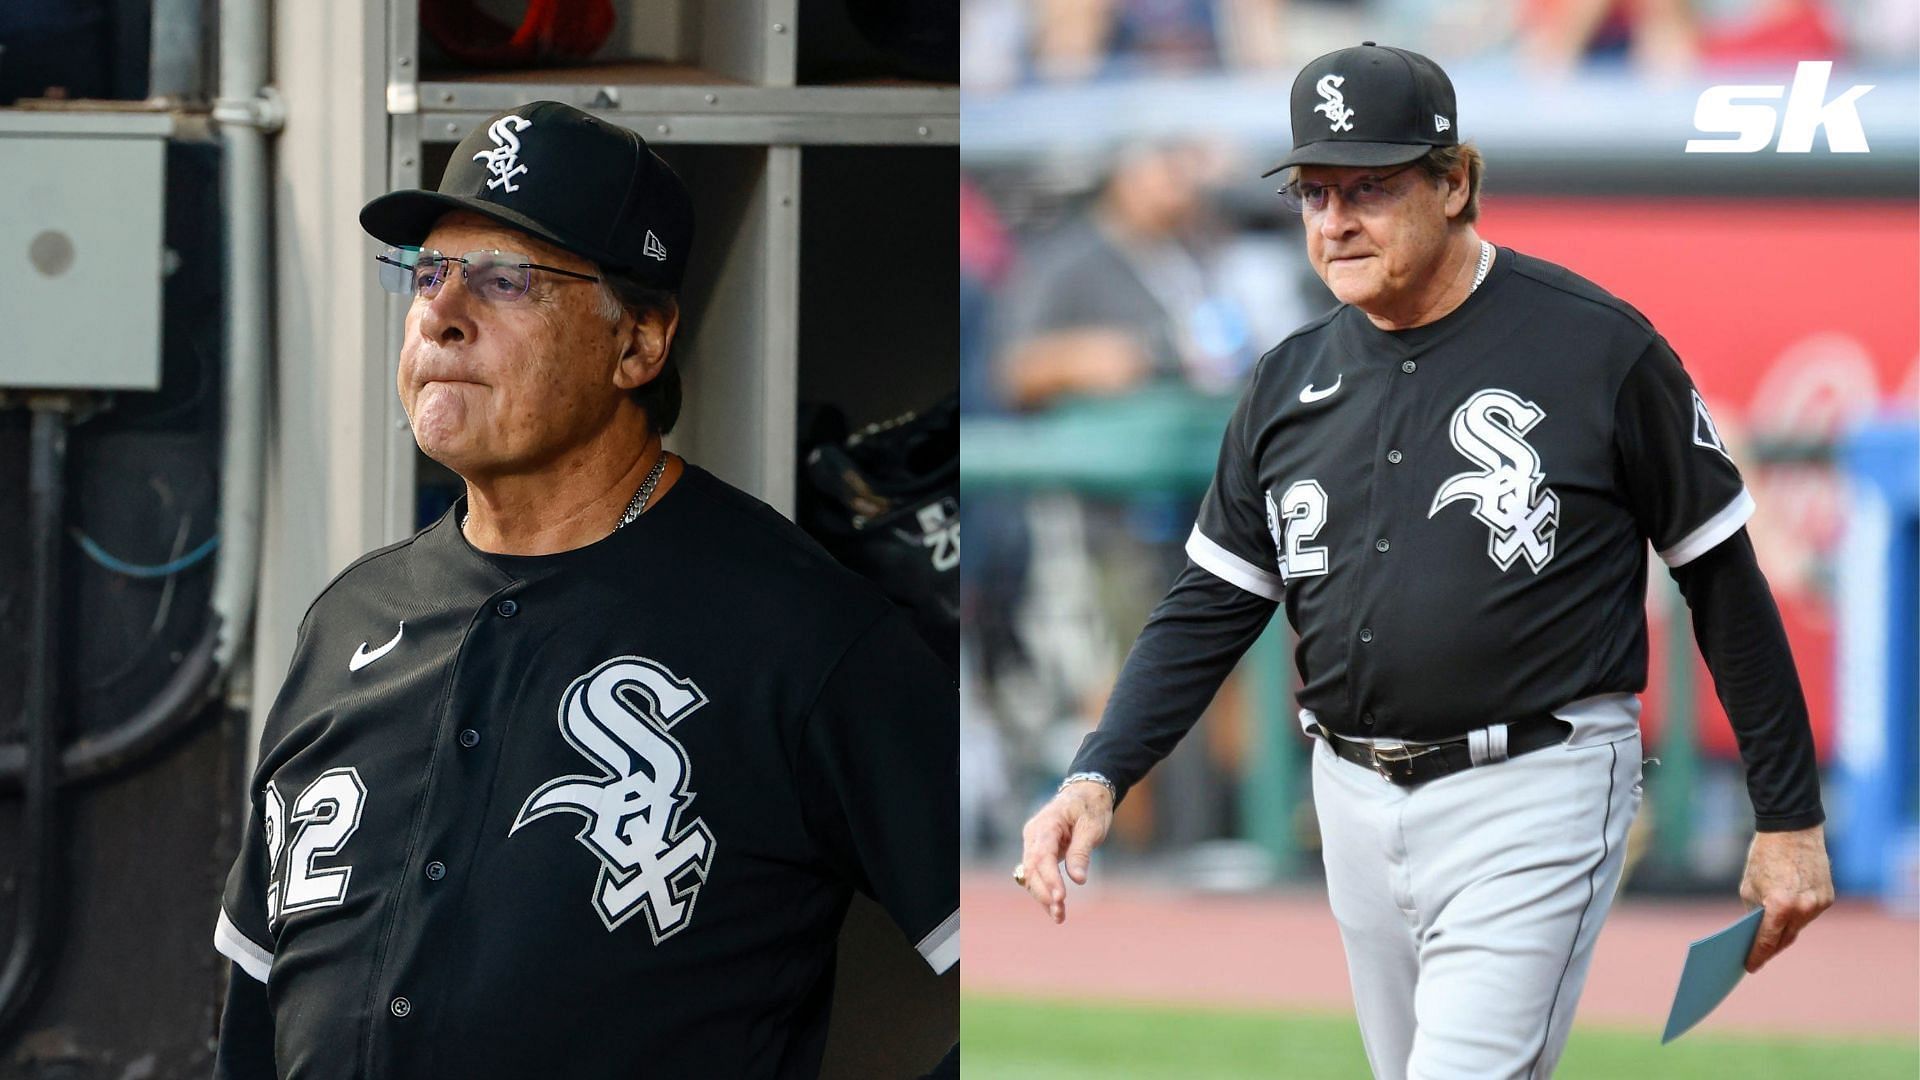 Hall of Famer Tony La Russa, 76, Hired As Chicago White Sox